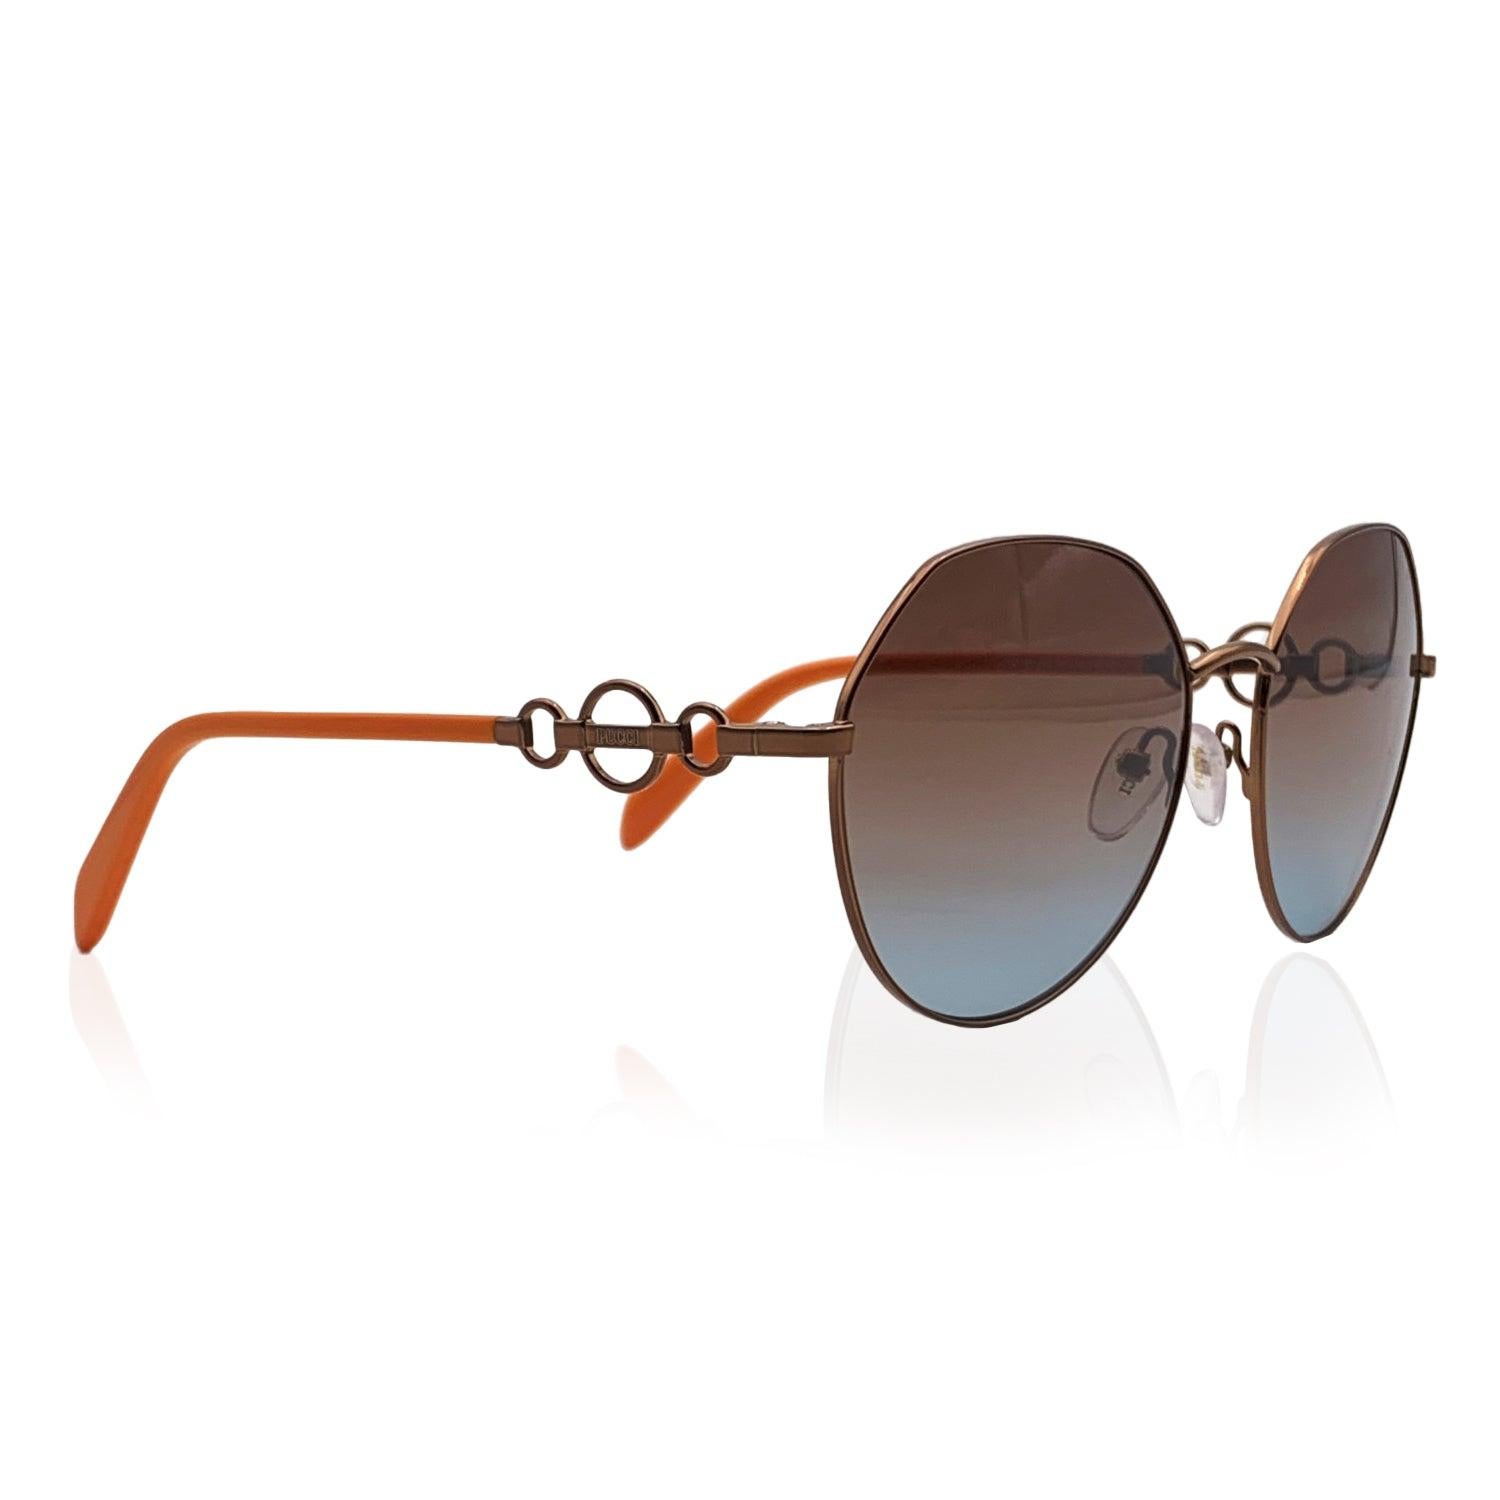 Beautiful Women Sunglasses designed by Emilio Pucci, mod. EP 0150 - 36 F. Bronze metal rounded frame with orange ear stems. High quality original brown gradient lenses, 100% UV protection. Imported Details MATERIAL: Metal COLOR: Brown MODEL: EP0150